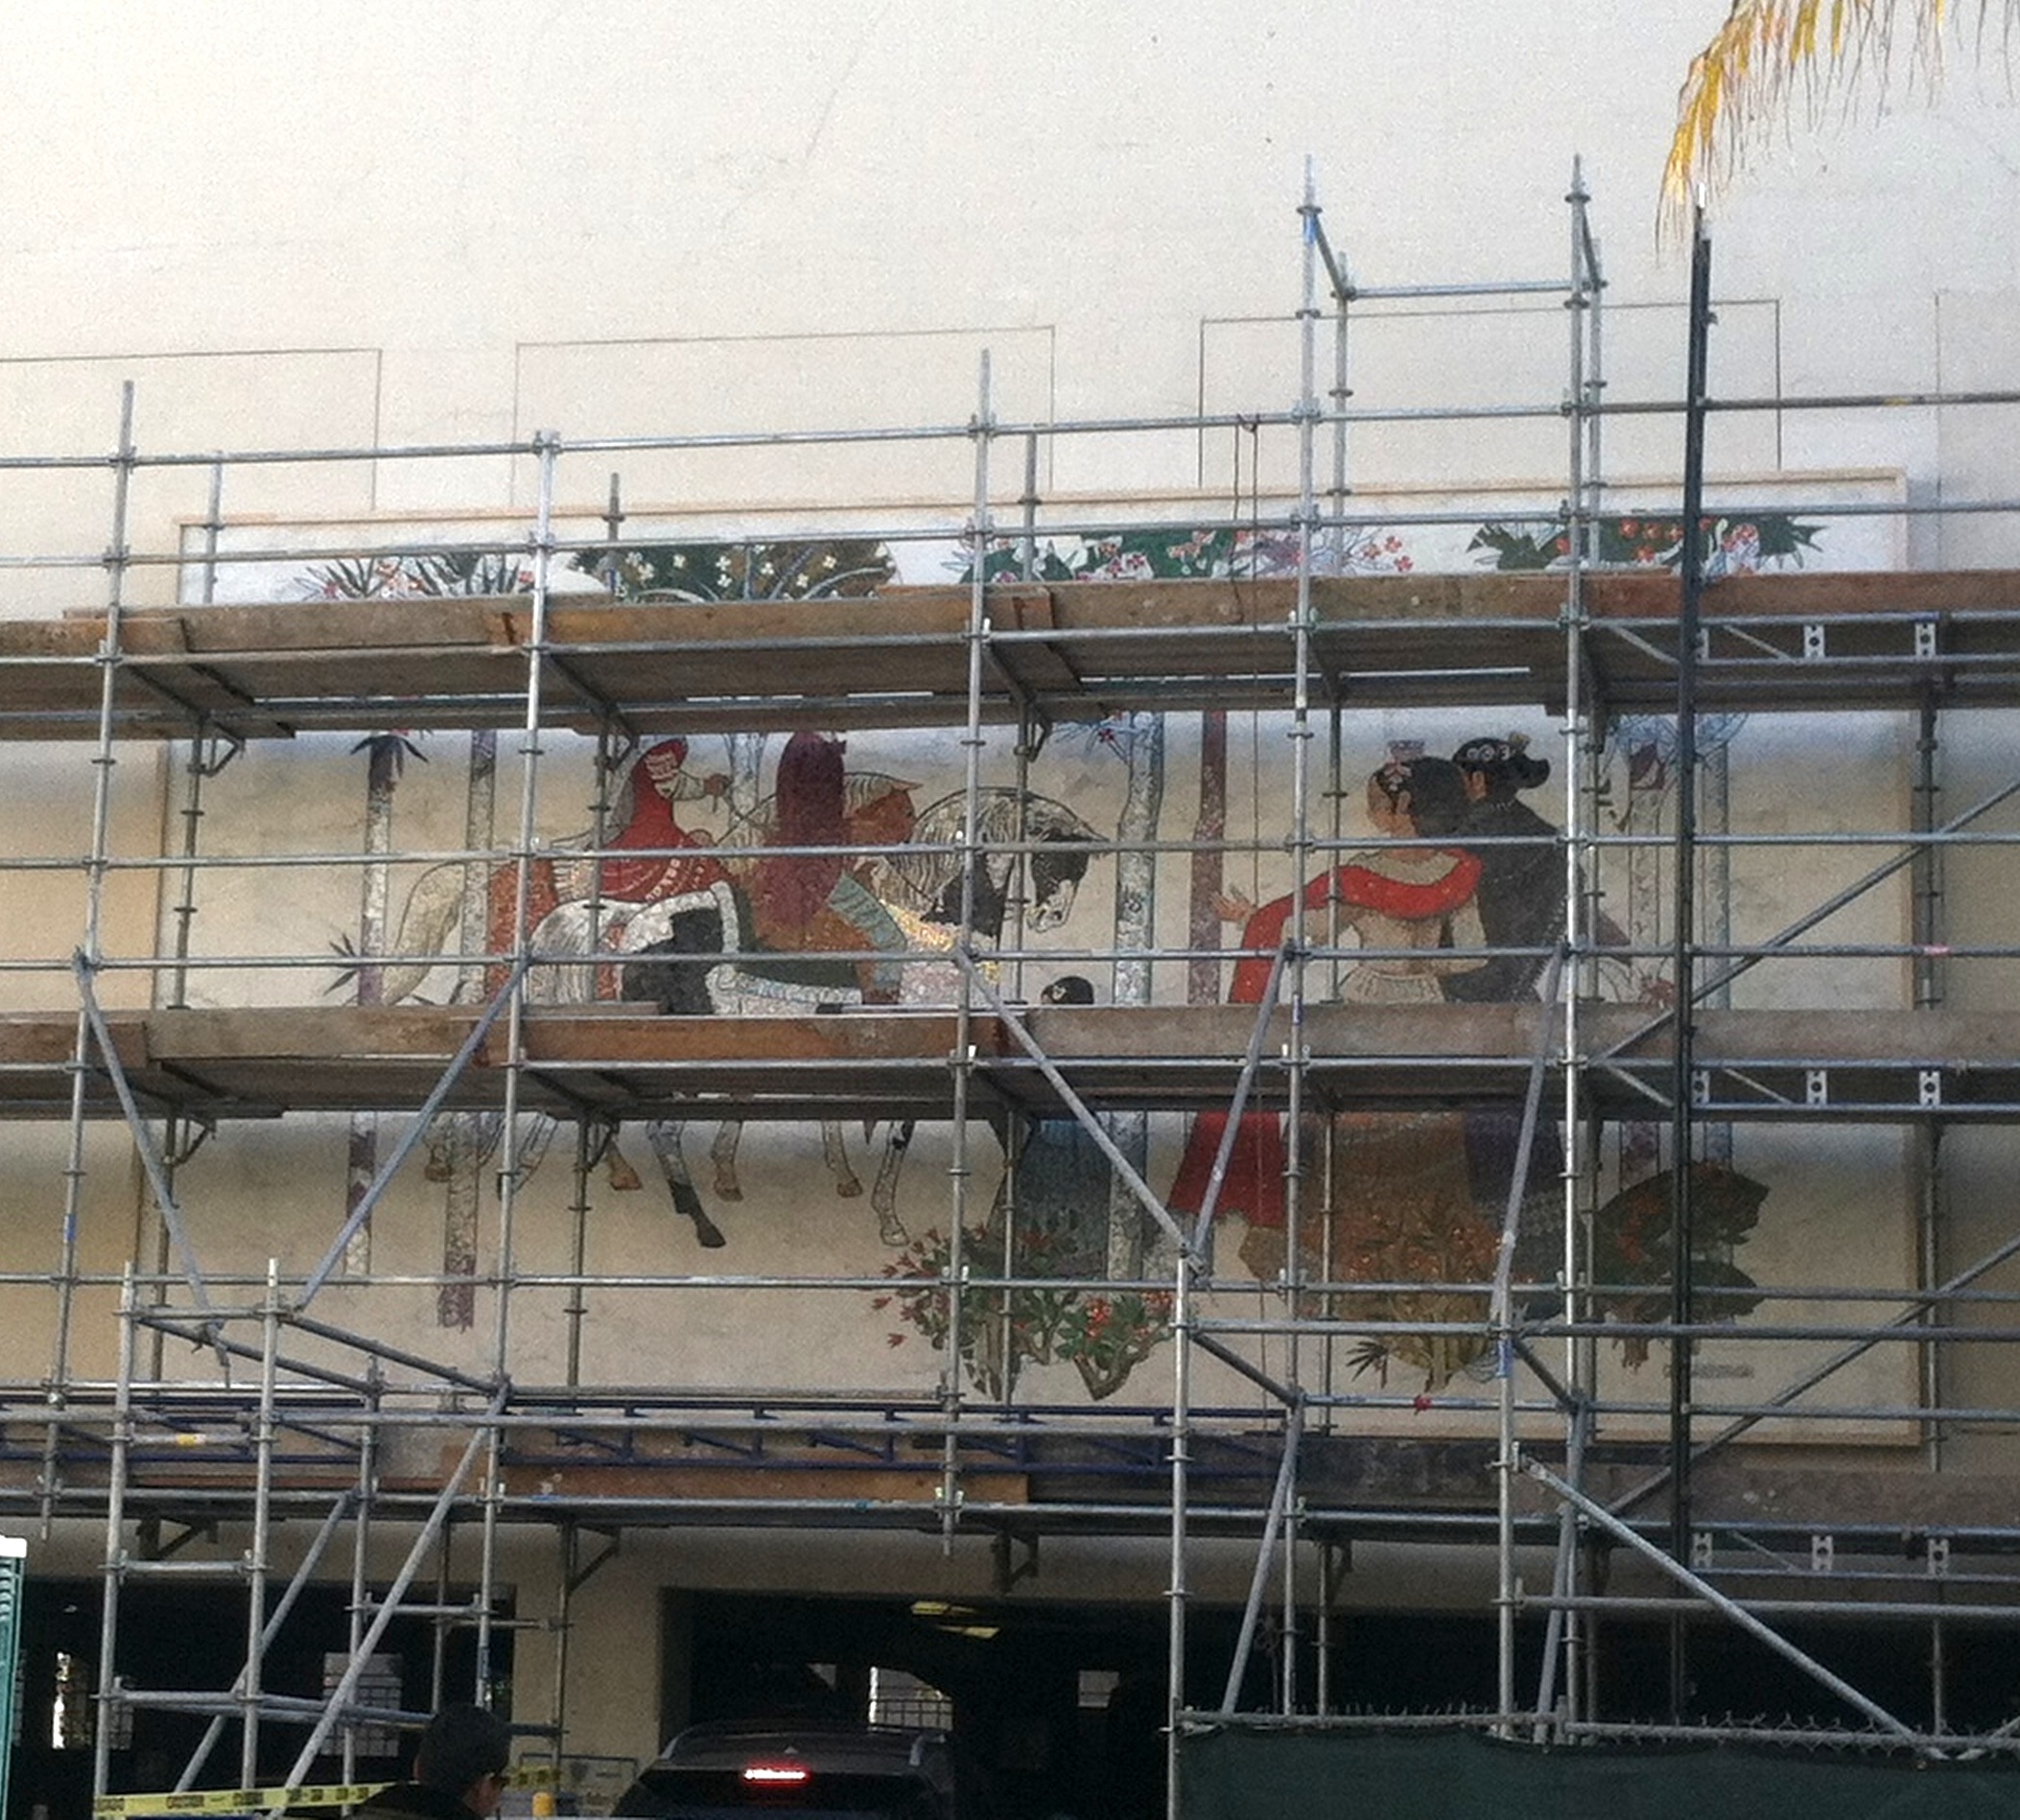 Beverly Wilshire Hotel mosaic being reinstalled at Beverly Hills Civic Center, 2013.